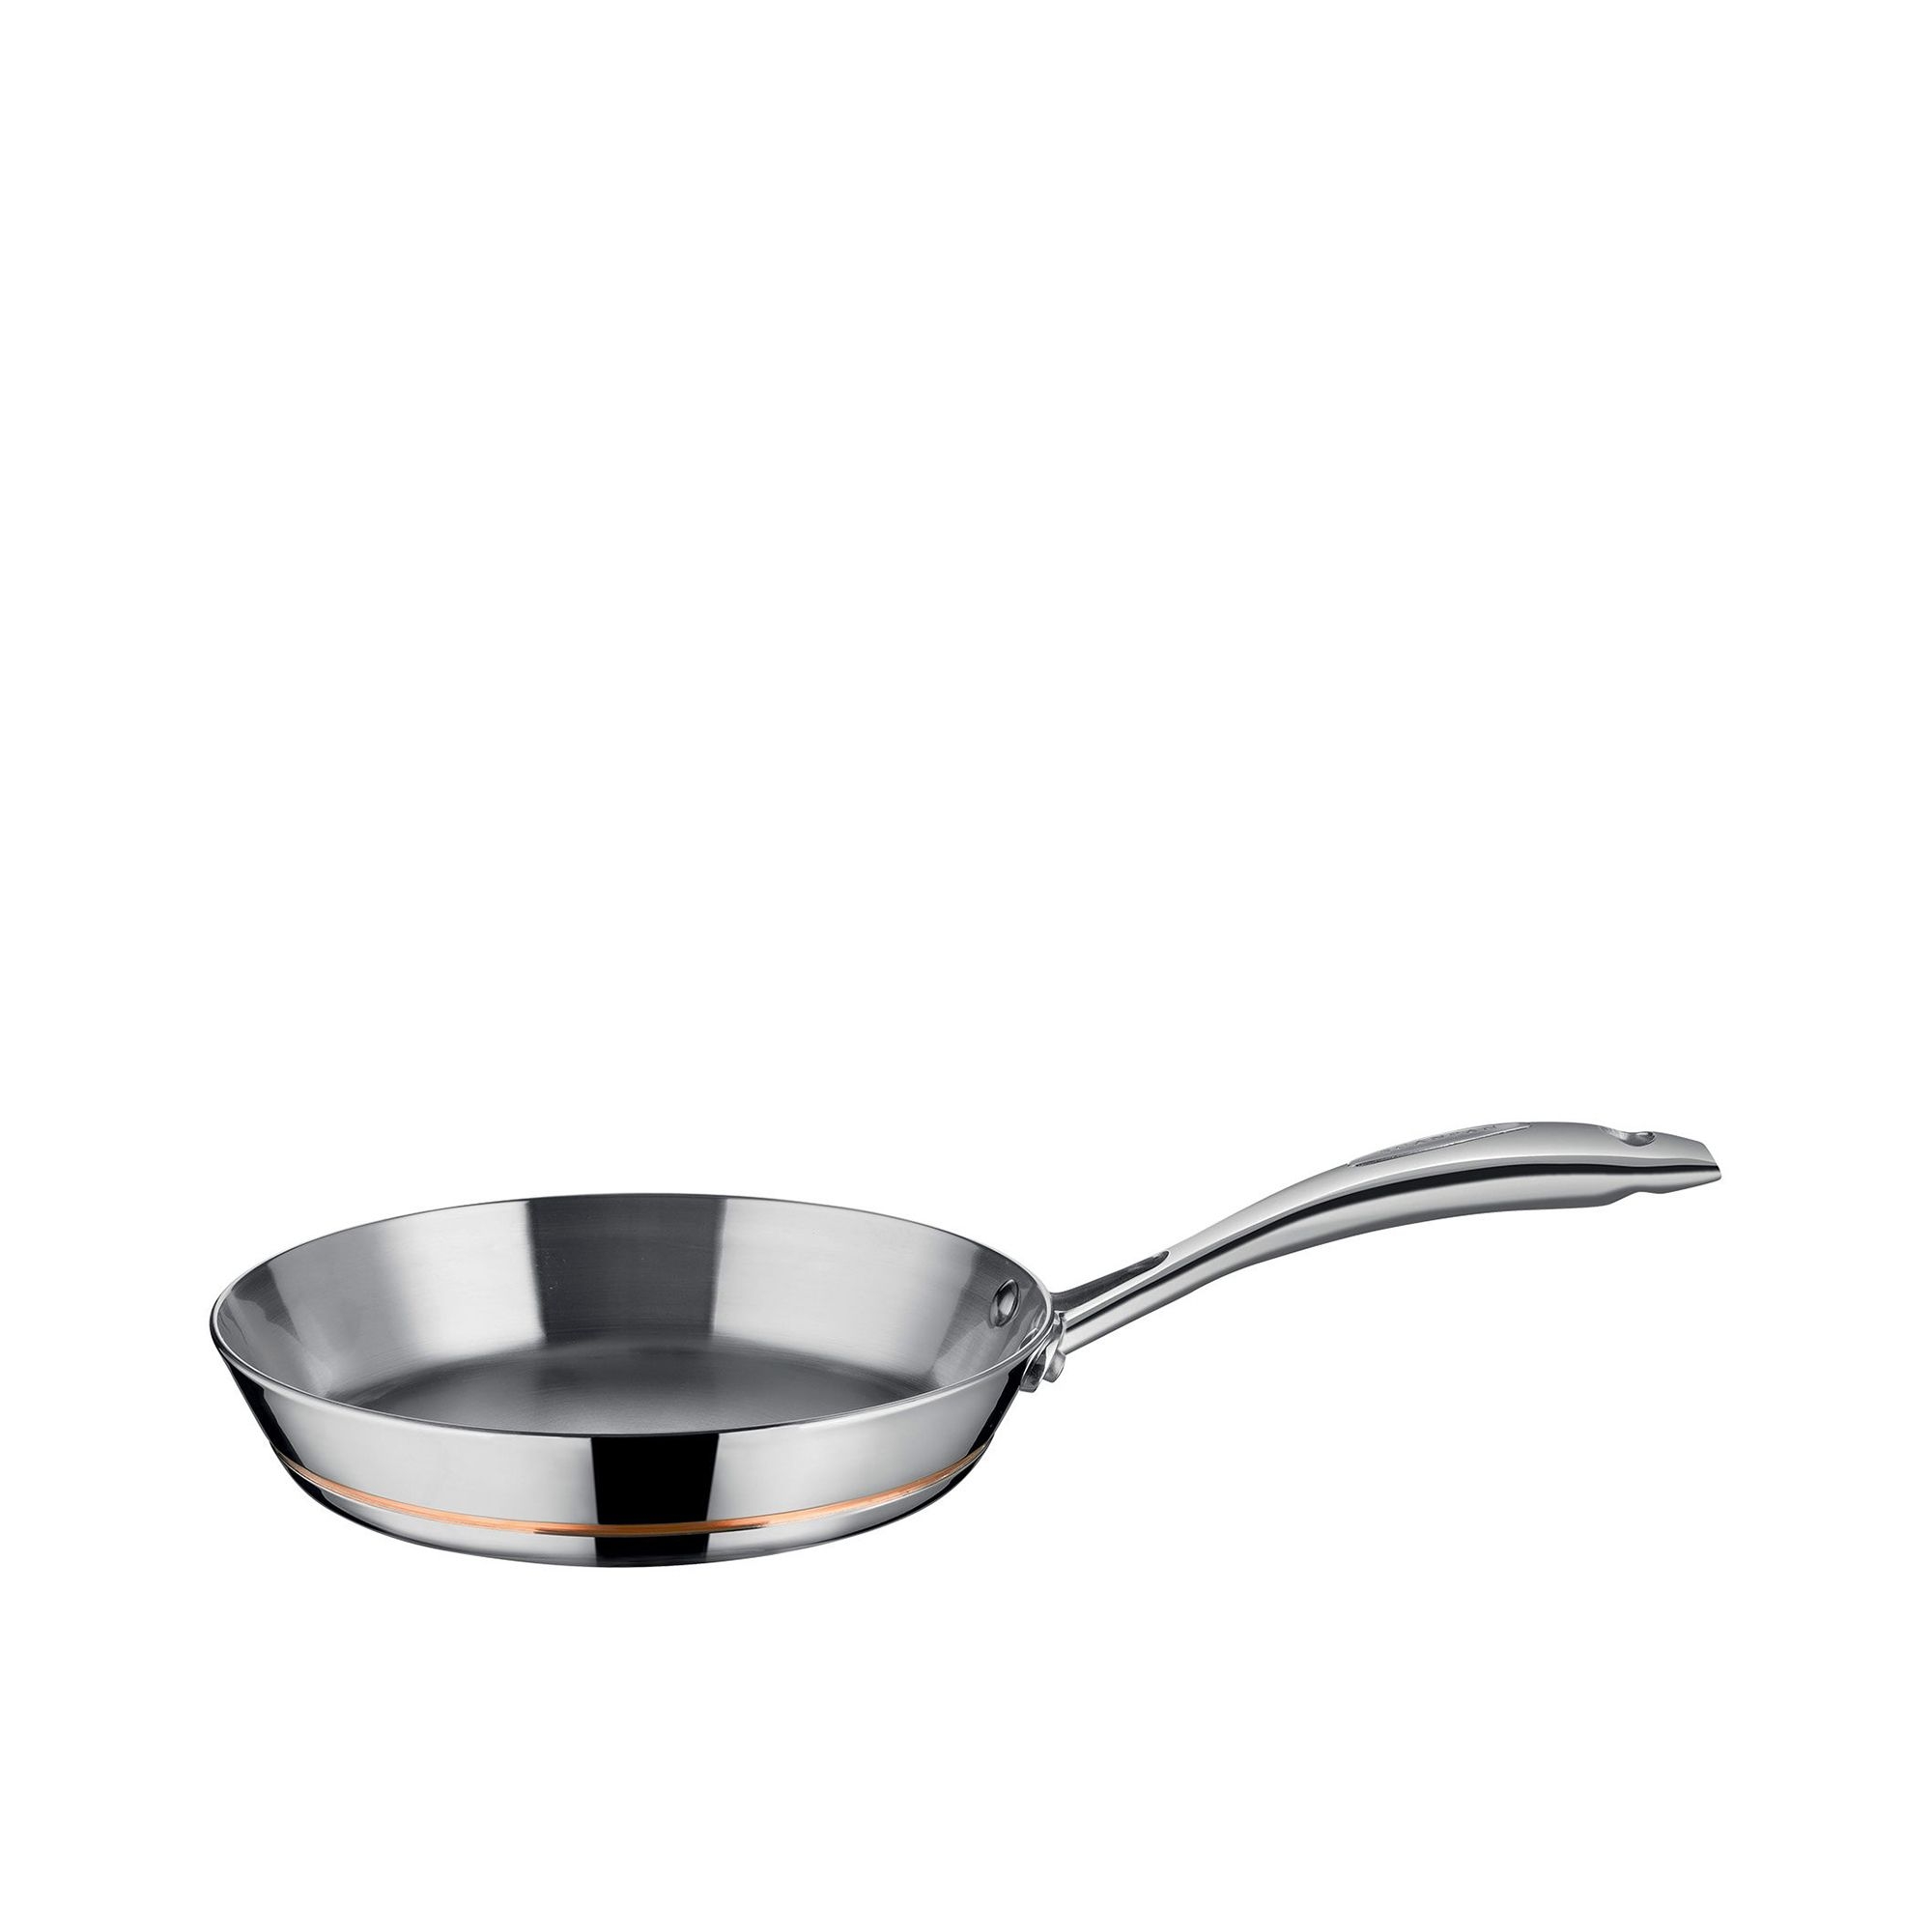 Scanpan Axis Stainless Steel Frypan 26cm Image 1